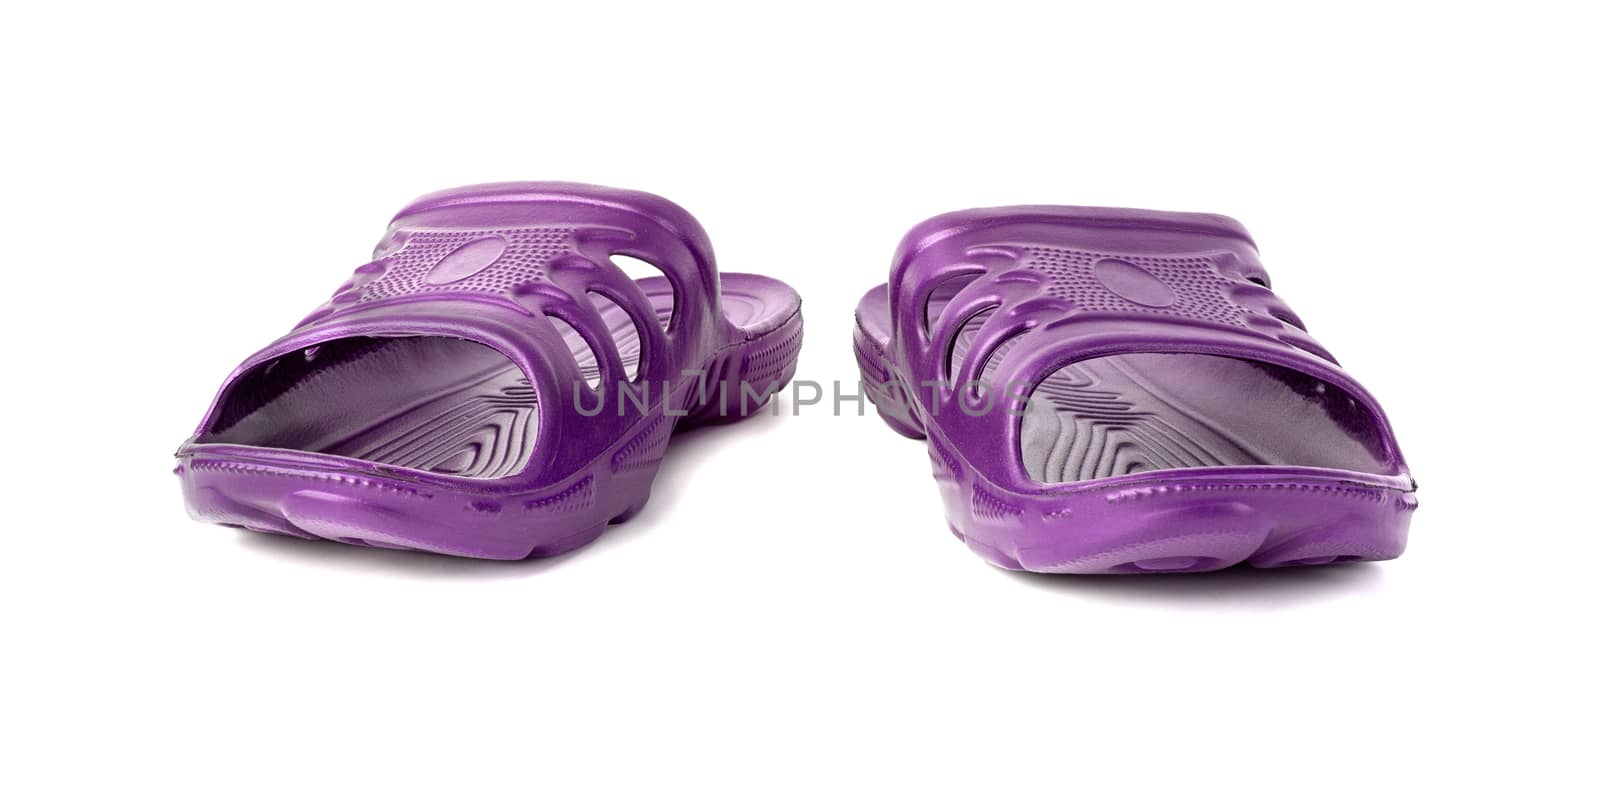 pair of cheap durable purple rubber slippers isolated on white background. by z1b